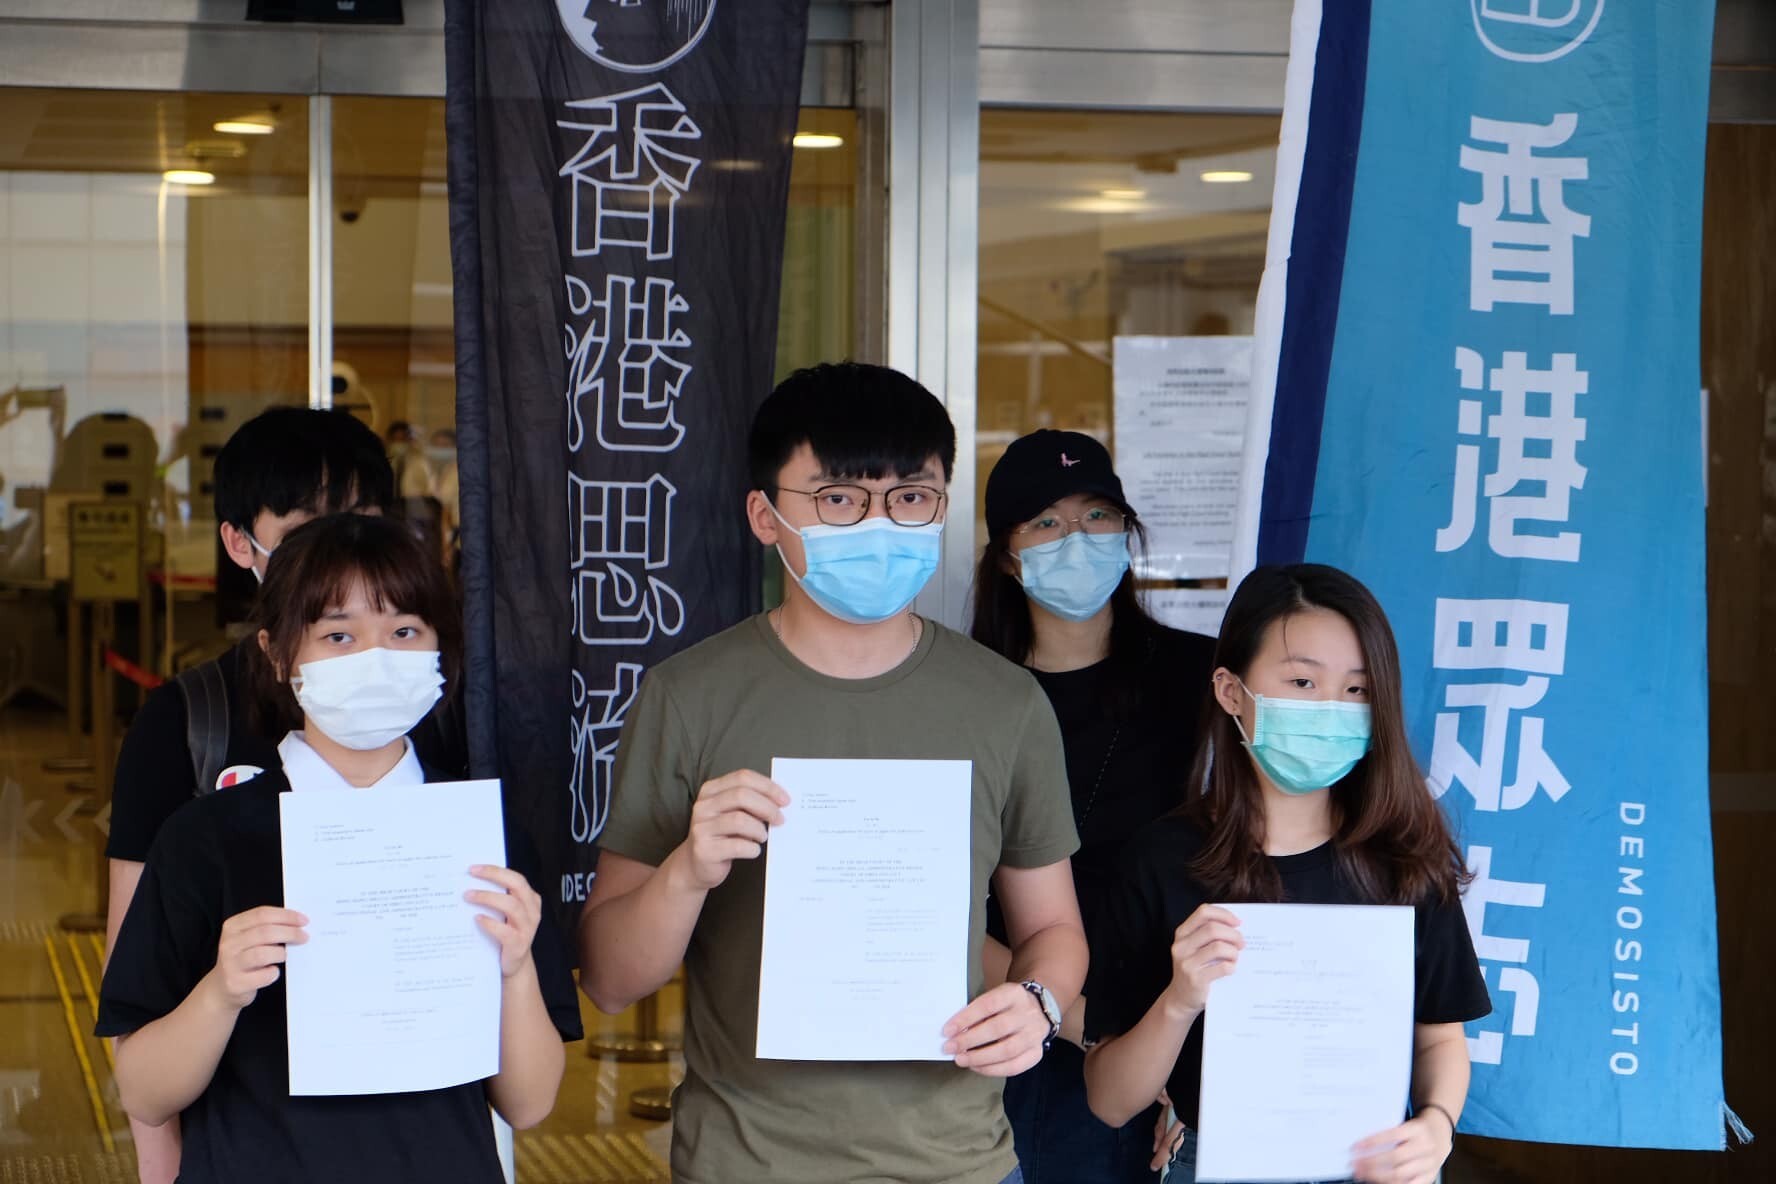 Hong Kong Secondary School Students Action Platform, co-founded by student groups including Demosisto, Ideologist and Demovanile, applied for a judicial review on the controversial history question on Wedesday.